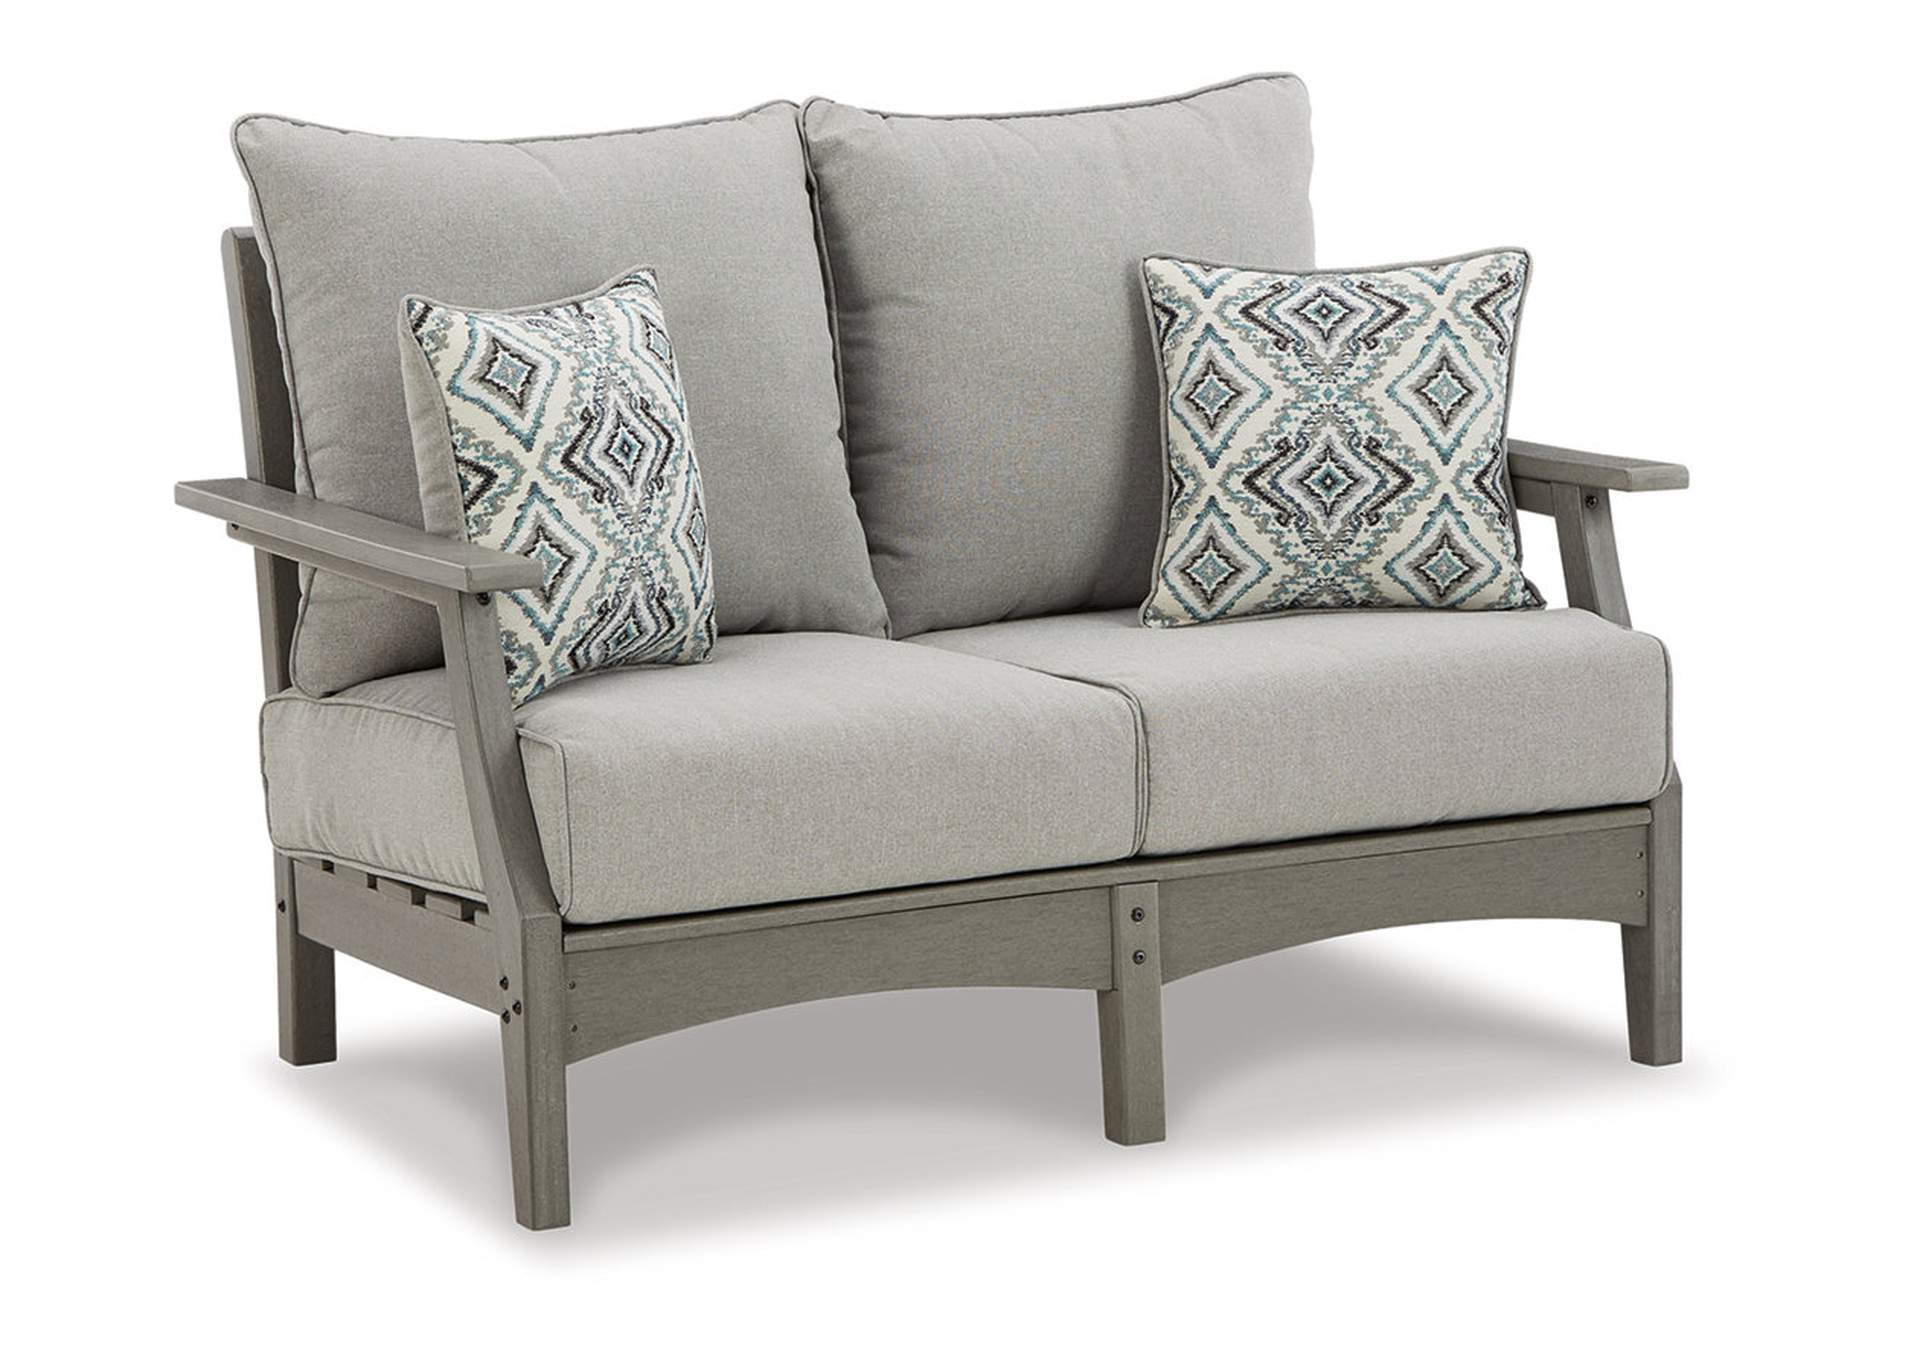 Visola Outdoor Loveseat with Cushion